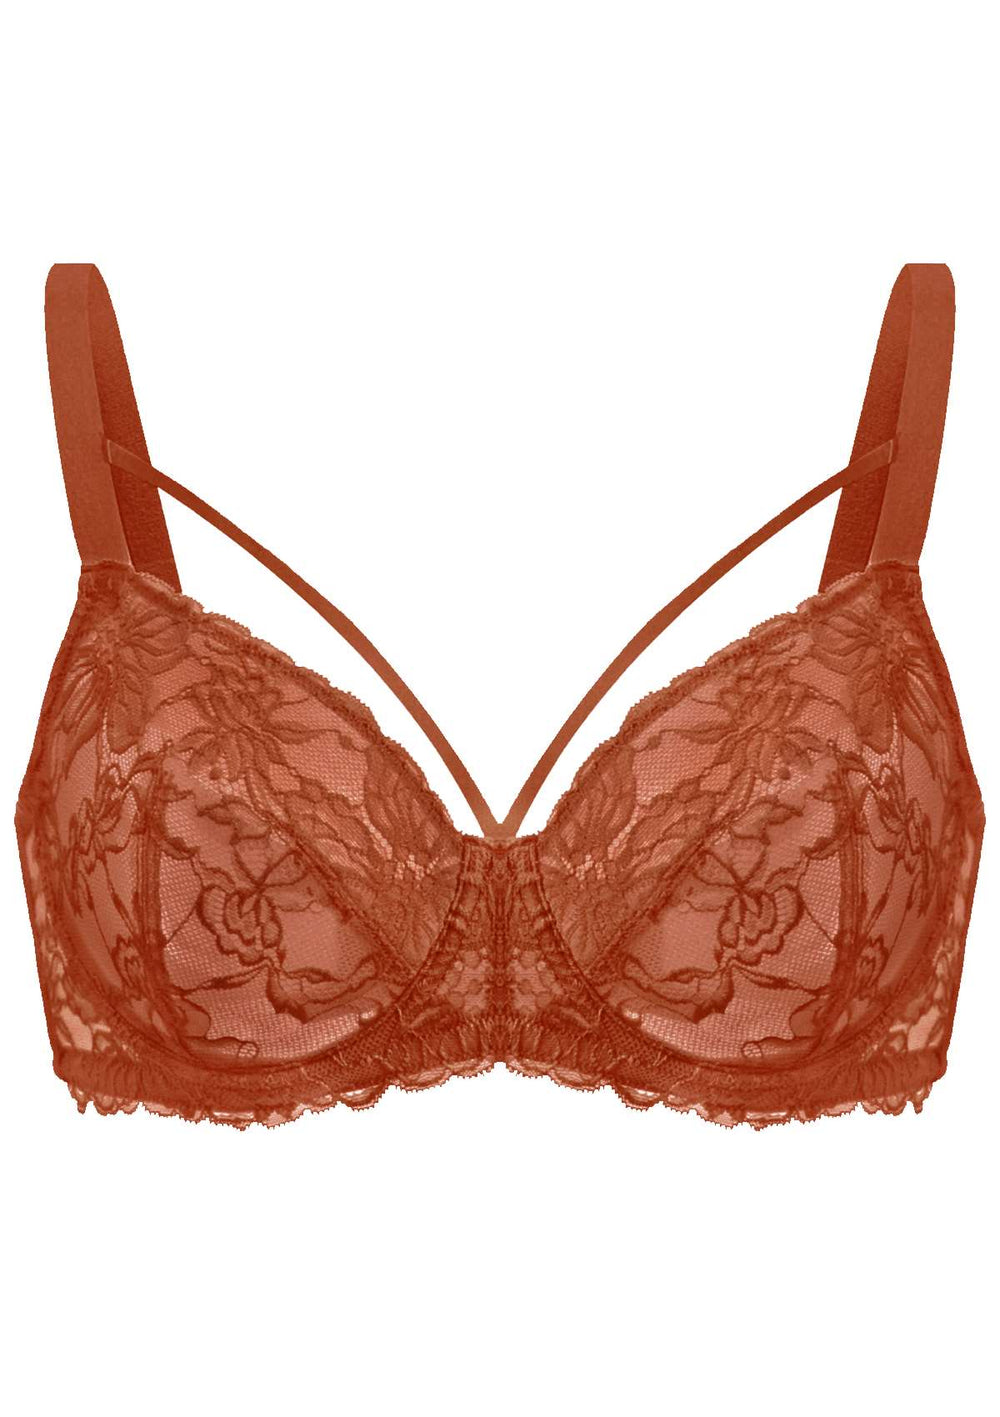 Pretty Secrets Sexy Lace Unlined Bra 5443601.htm - Buy Pretty Secrets Sexy Lace  Unlined Bra 5443601.htm online in India